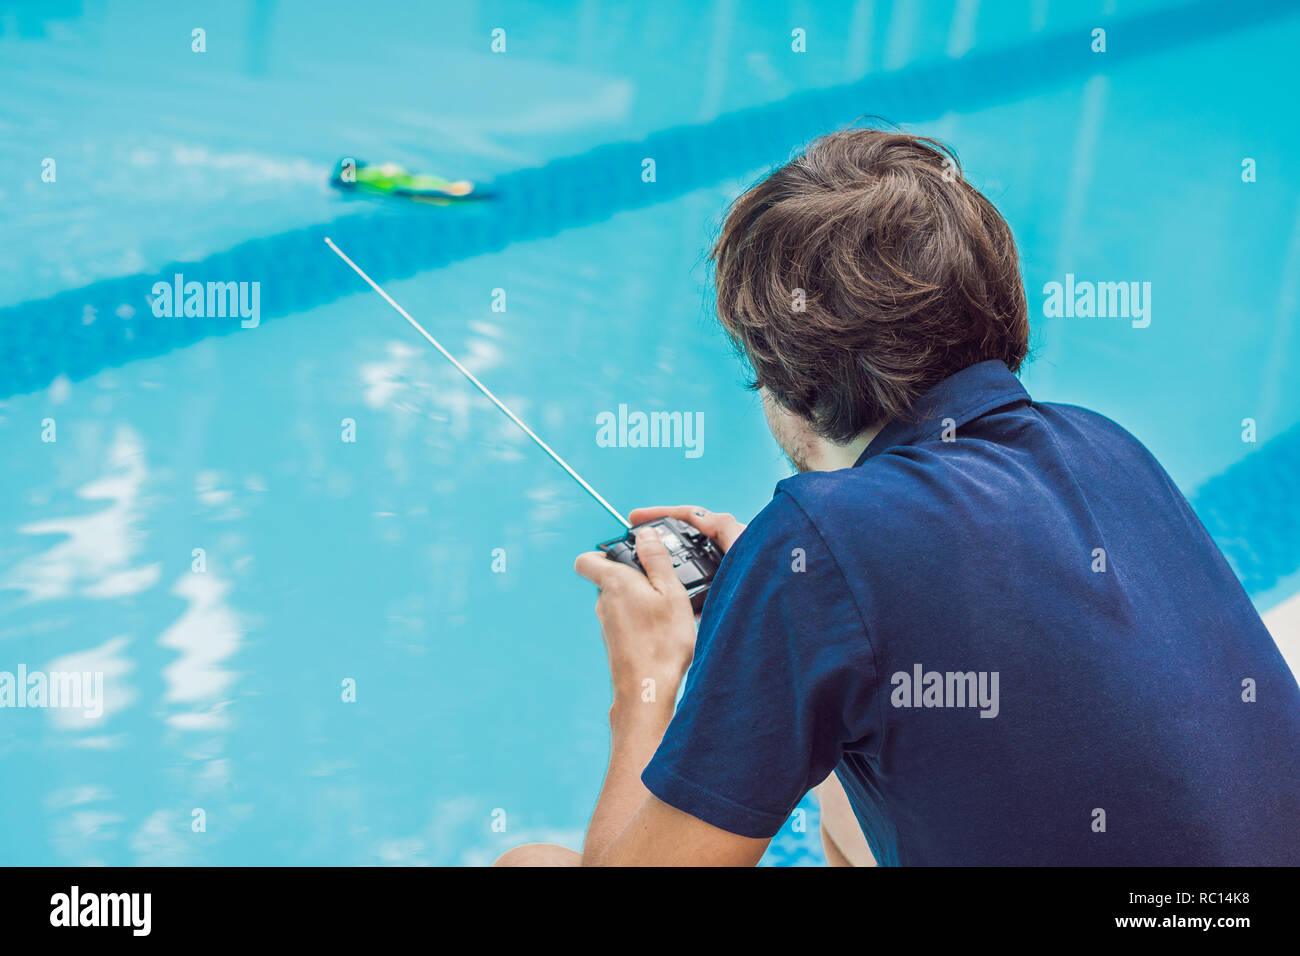 Man playing with a remote controlled boat in the pool Stock Photo